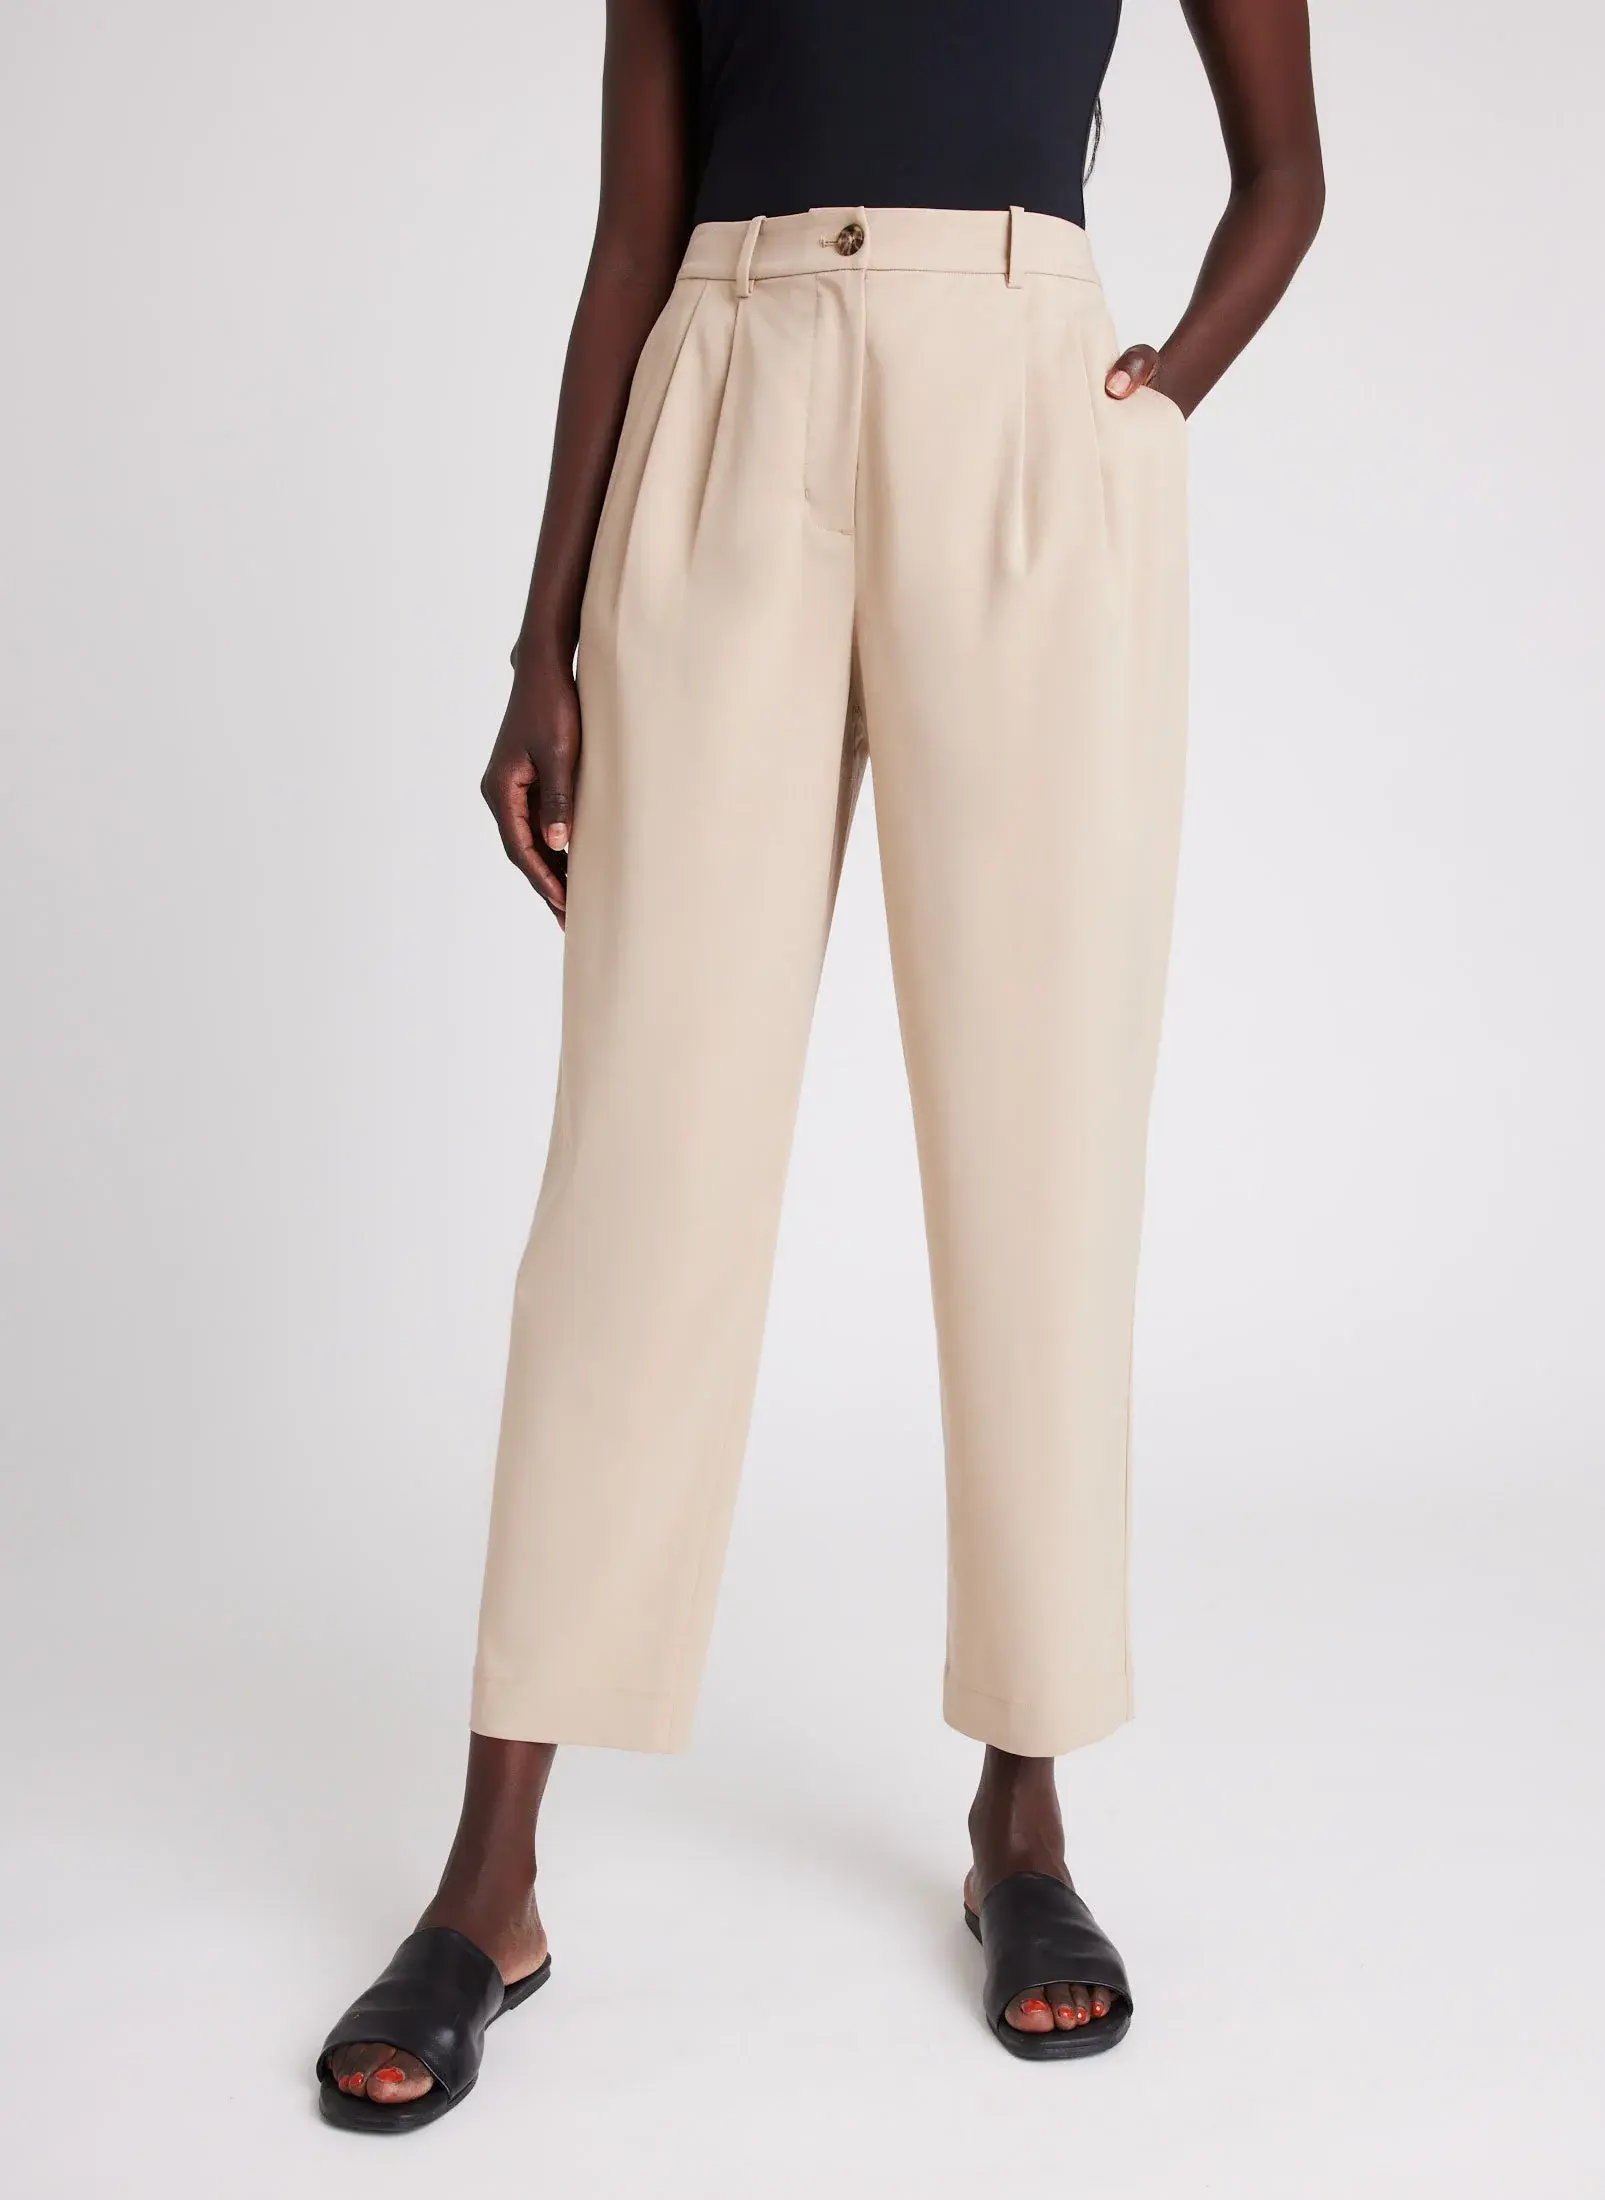 Kit And Ace Sublime Ankle Trousers. 1